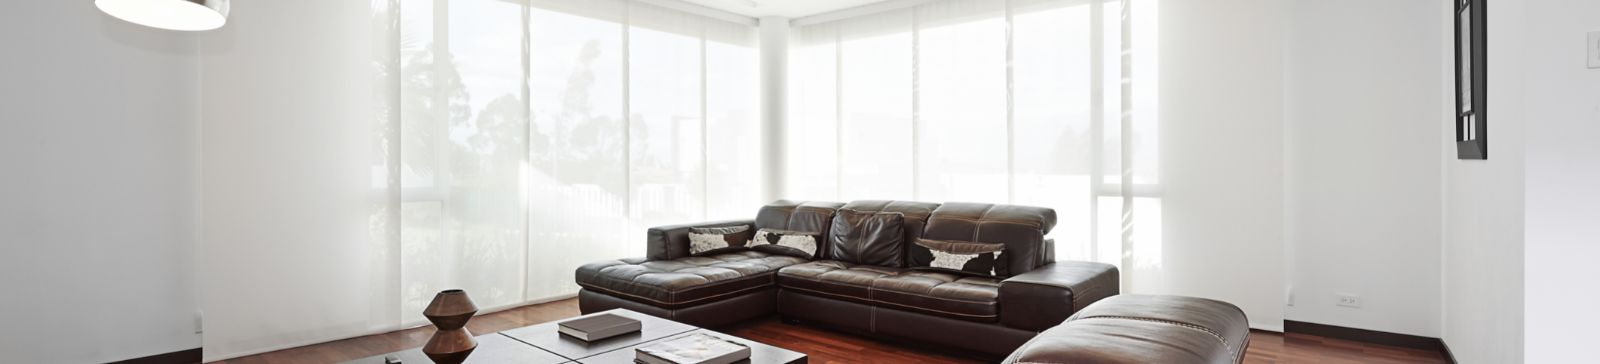 The Benefits of Installing Roller Shading Systems for Your Home and Business